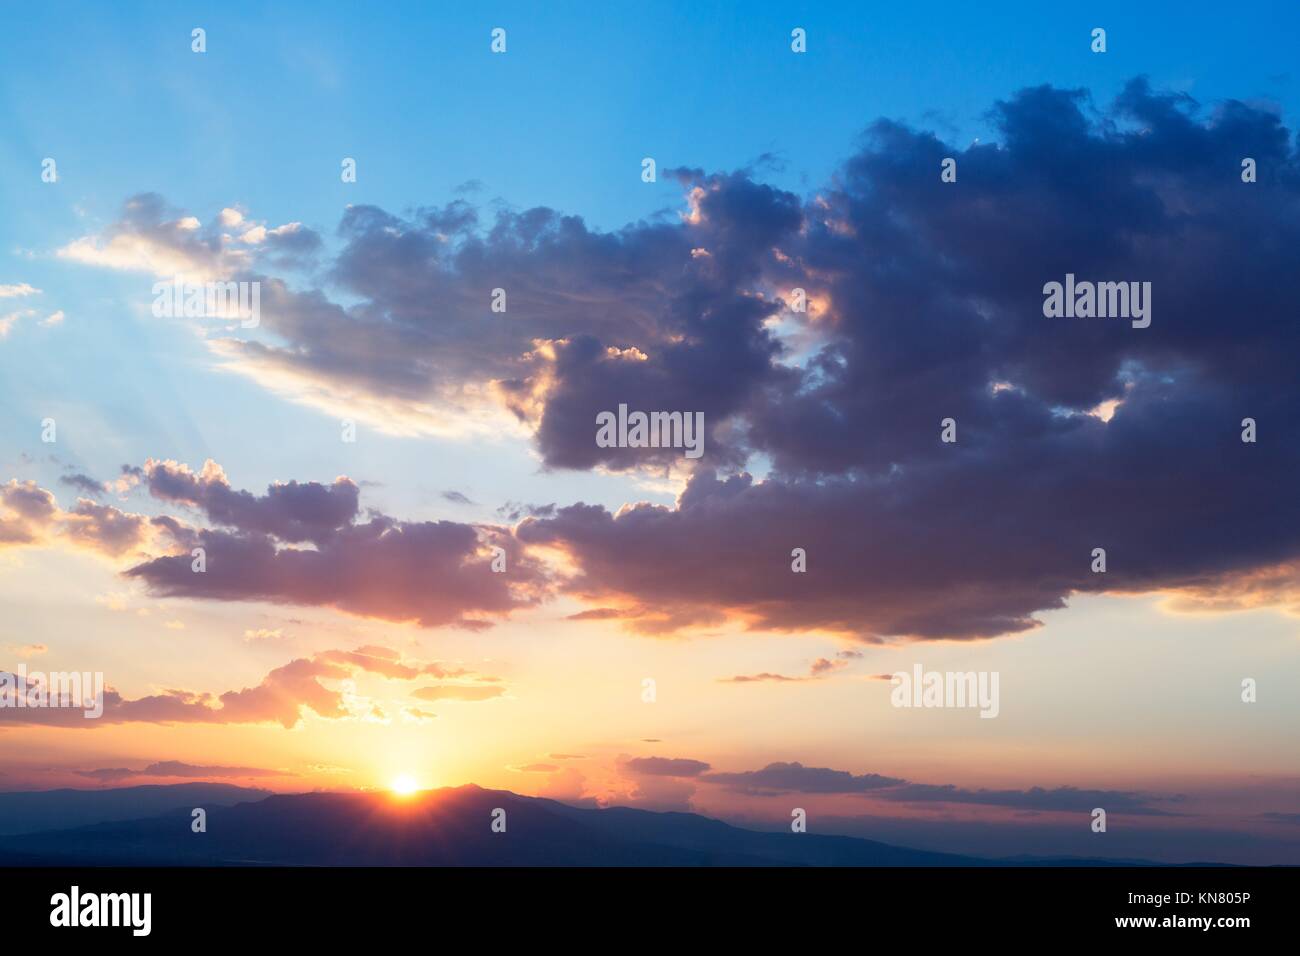 Sky with sun clouds at sunset rays. Stock Photo